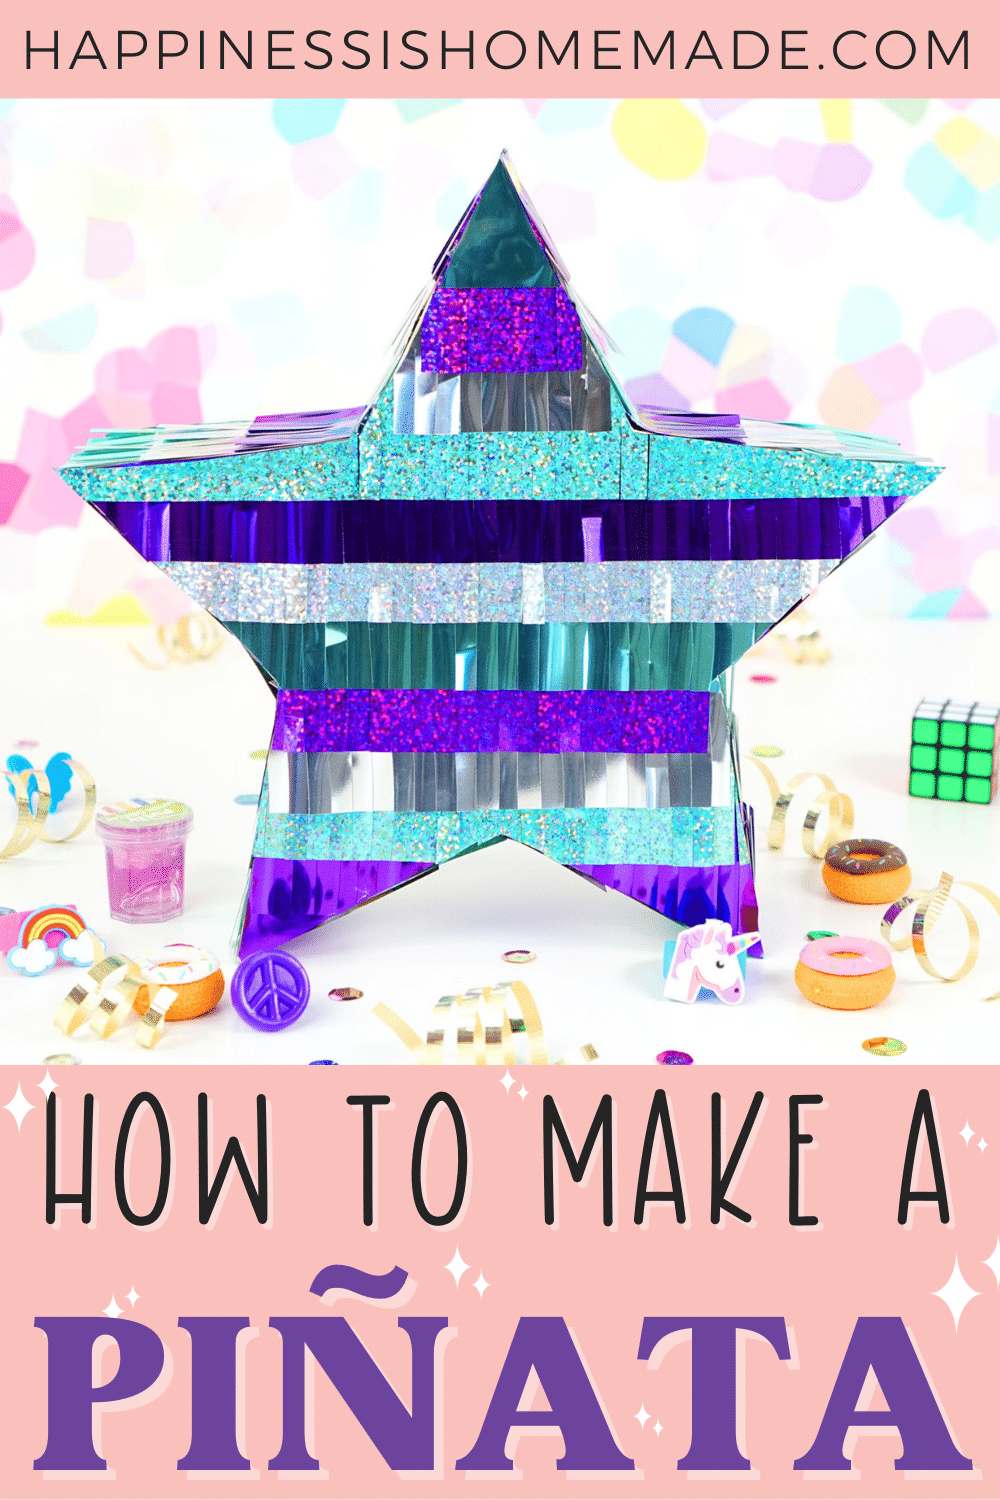 How To Make A Pinata Pinterest Graphic